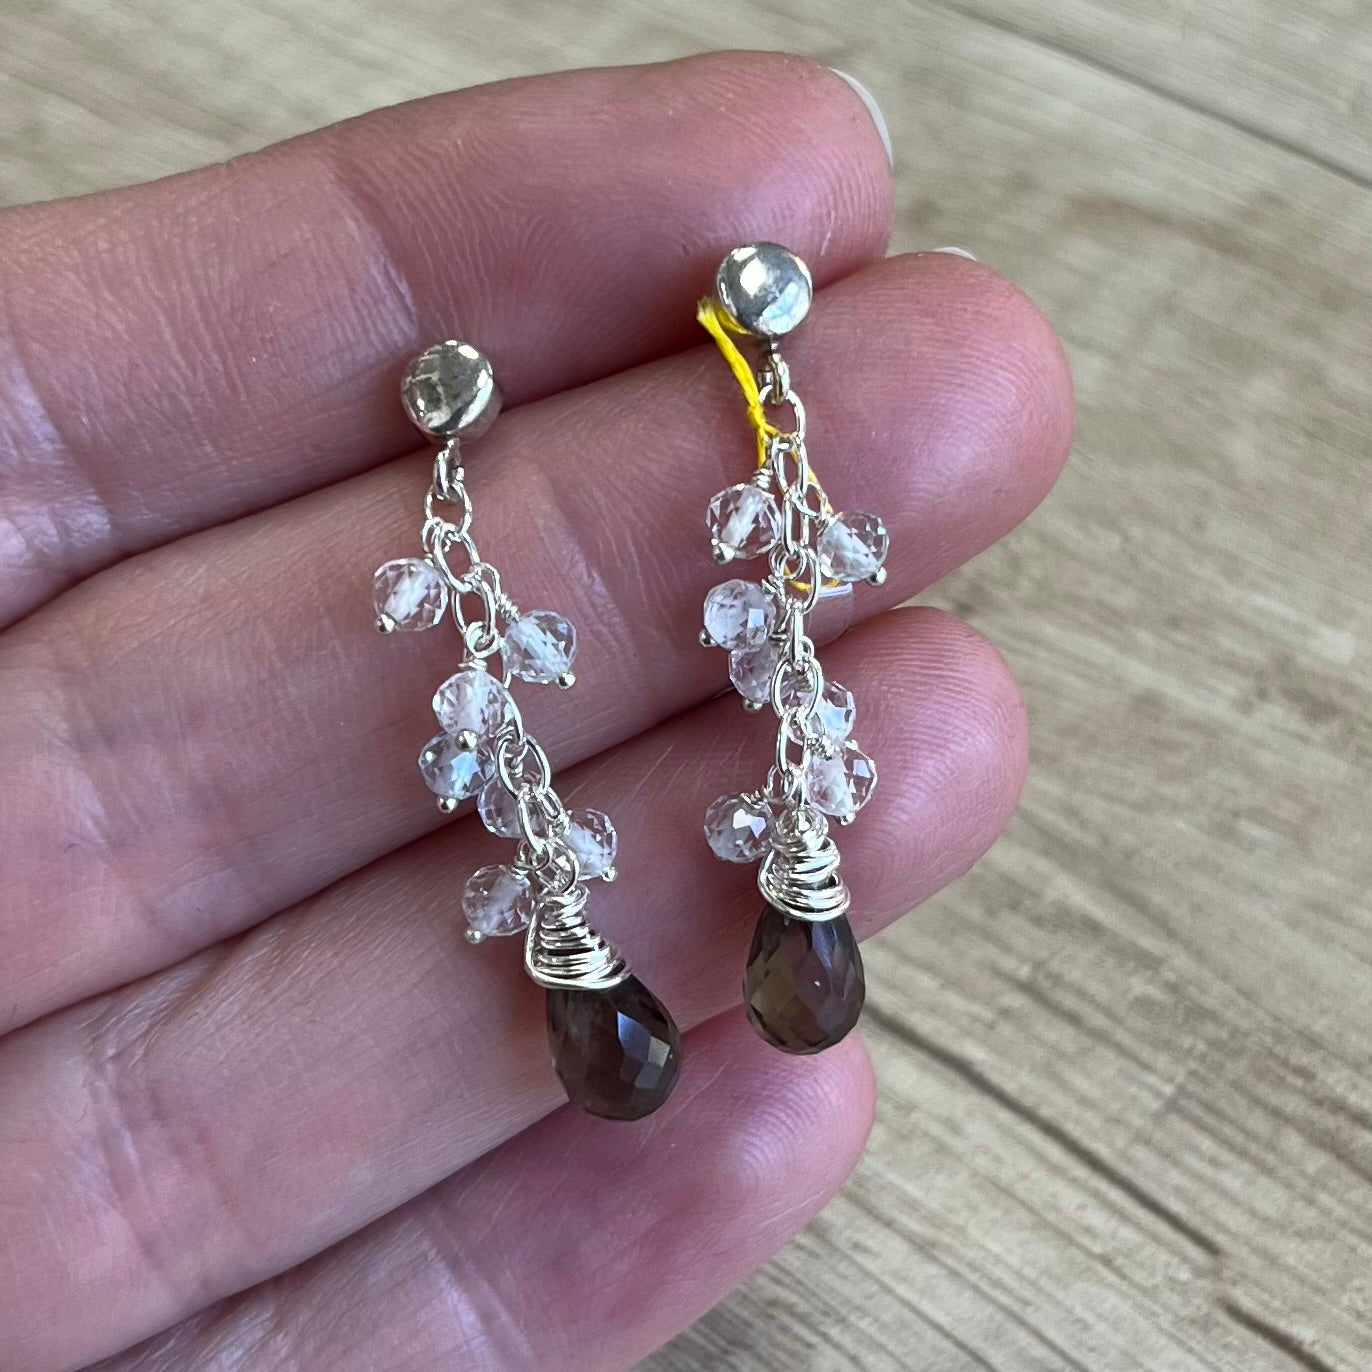 Earrings with smoky quartz and topaz